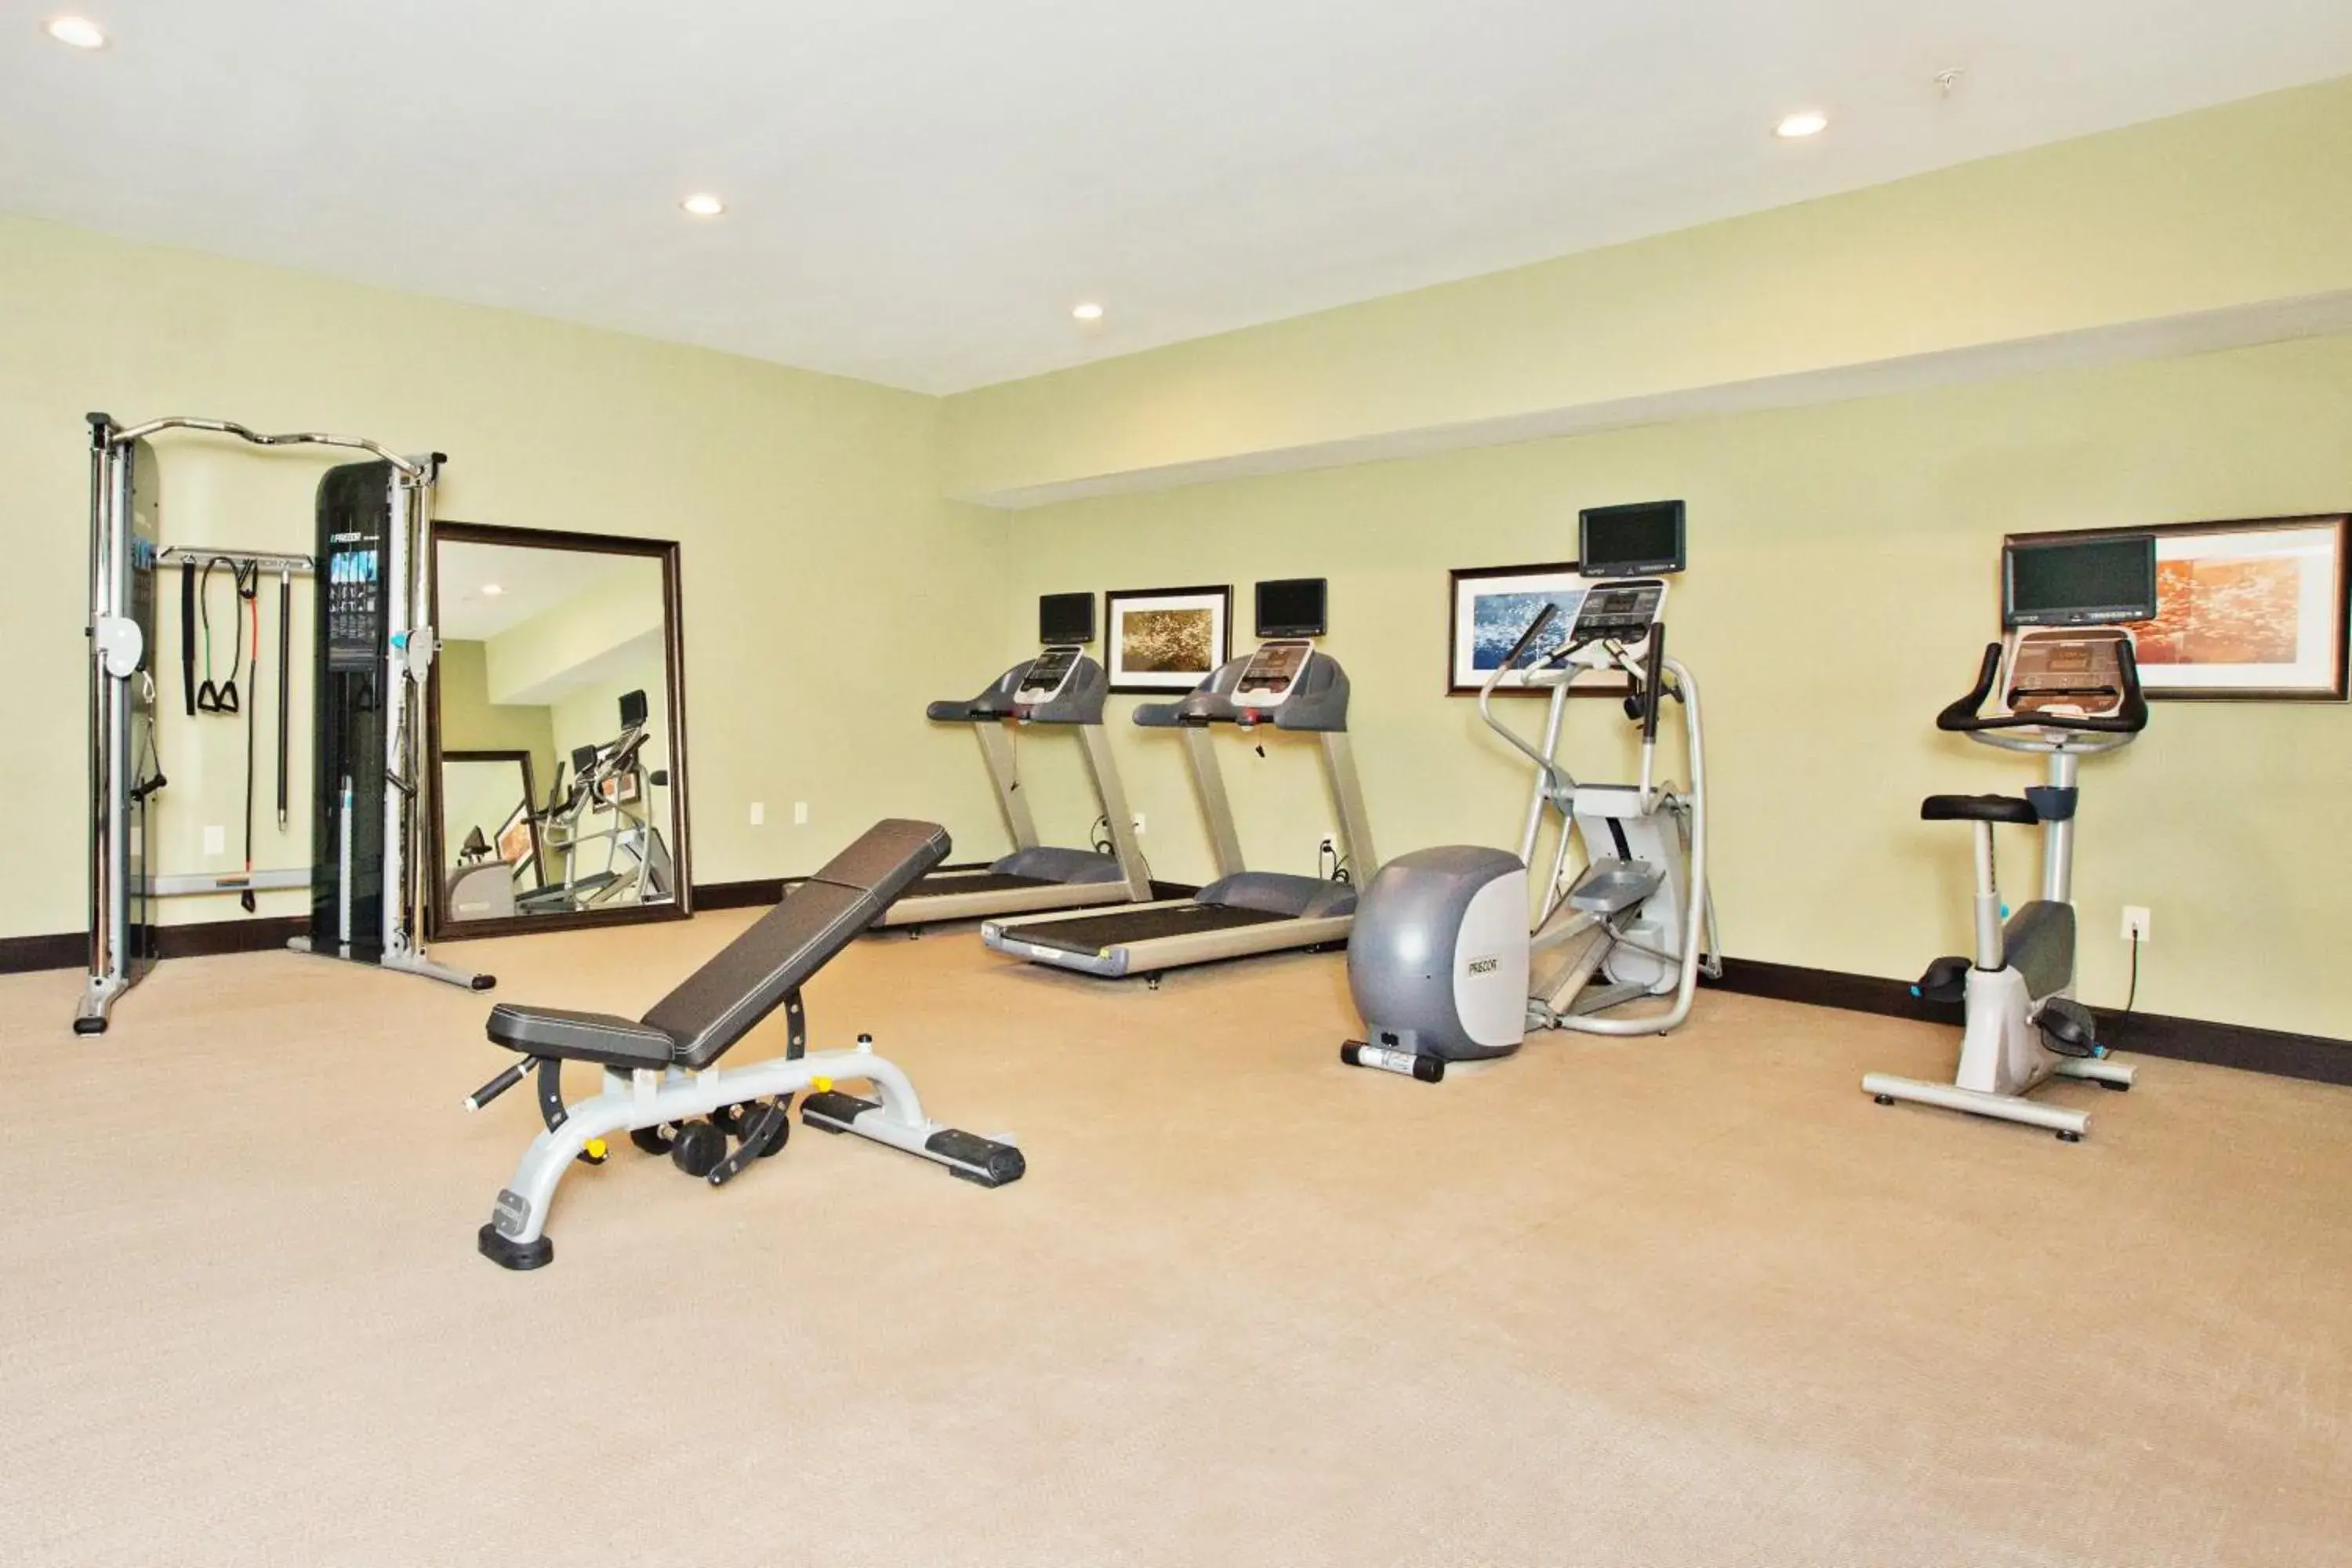 Fitness centre/facilities, Fitness Center/Facilities in Staybridge Suites Austin South Interstate Hwy 35, an IHG Hotel